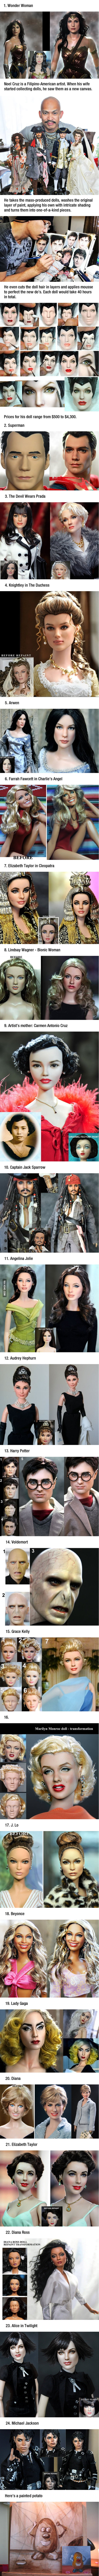 25 Ultra-Realistic Action Figures Repainted From Mass-Produced Dolls (Noel Cruz)